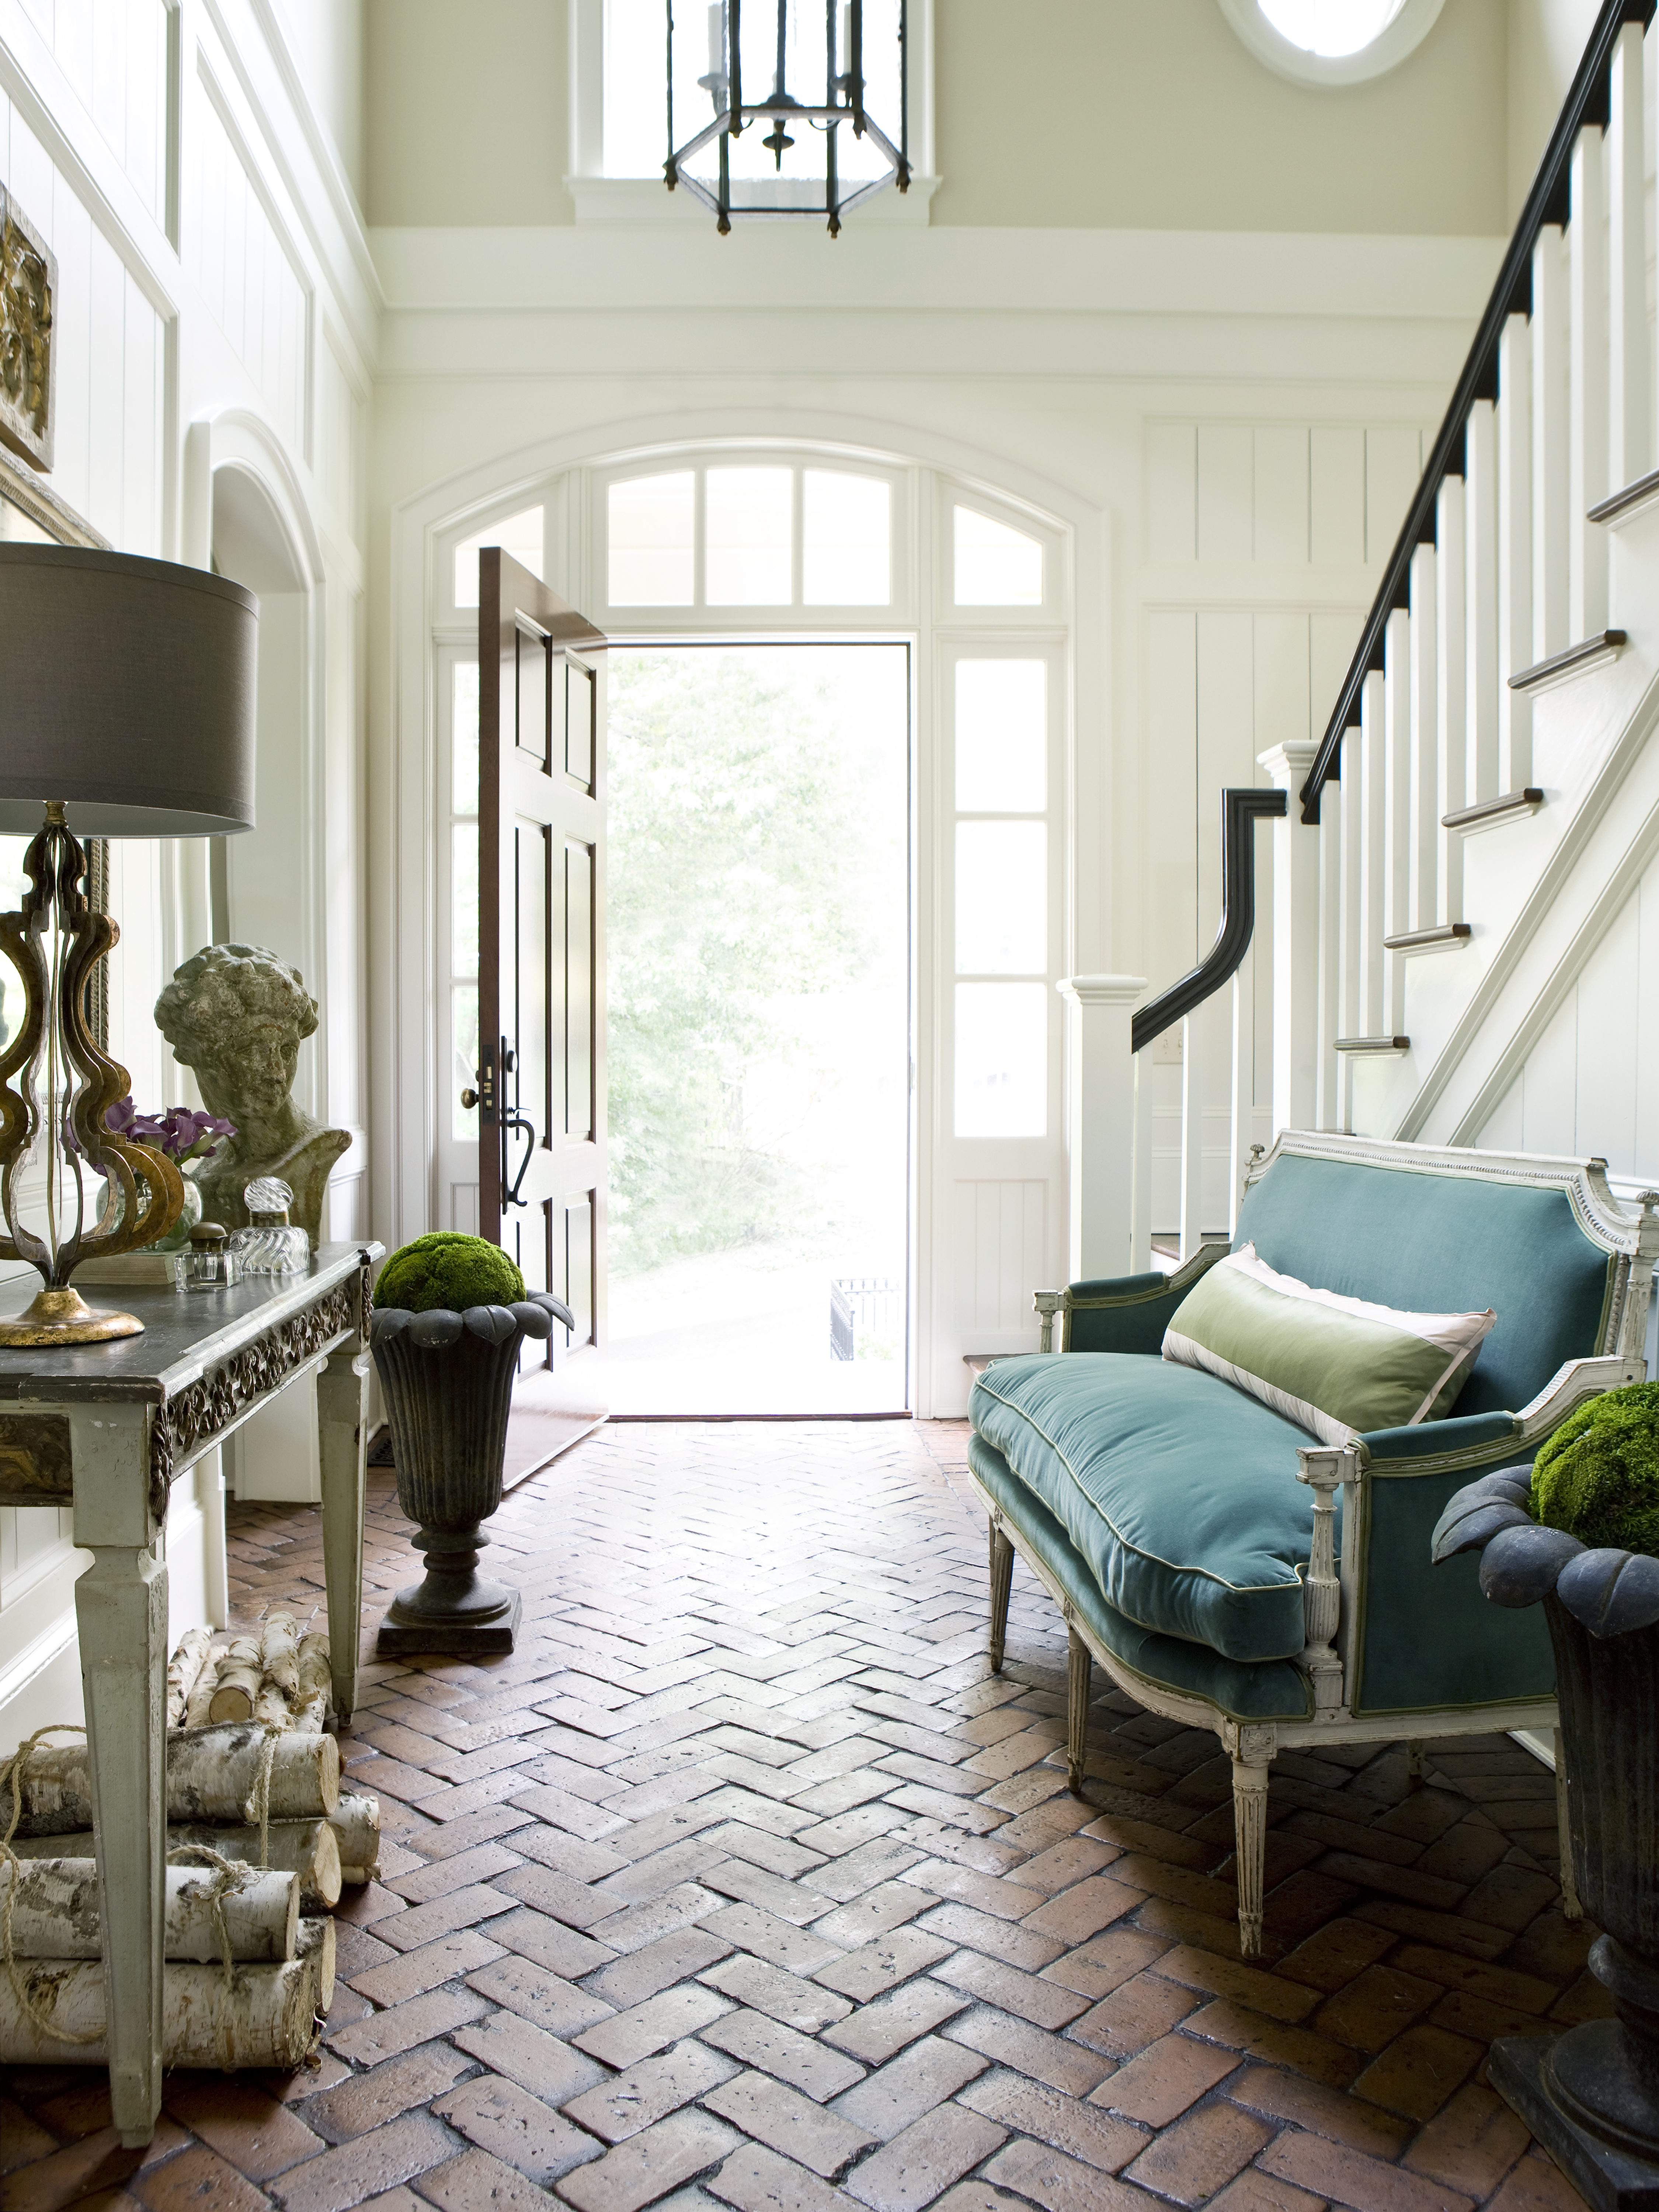 "The antique settee in an updated vibrant colored velvet welcomes a guest to sit and drop their handbag or jacket.  The texture of the brick, wall paneling, fabrics and antiques give the guest so much to take in and enjoy upon entering the house!" according to Amy Morris Interiors. Courtesy of Erica George Dines